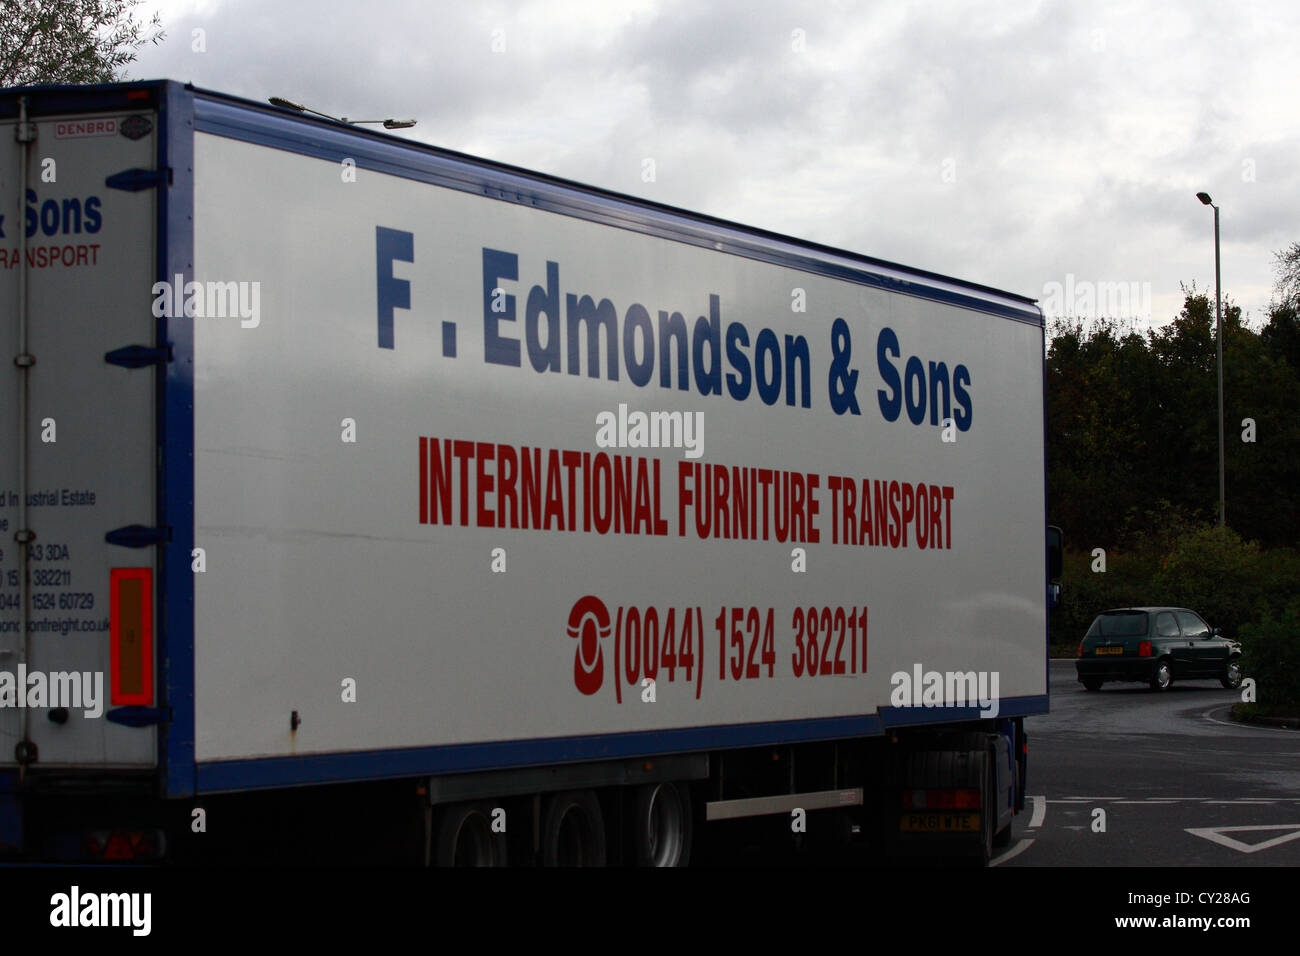 A 'F Edmondson' truck traveling along a road in England Stock Photo